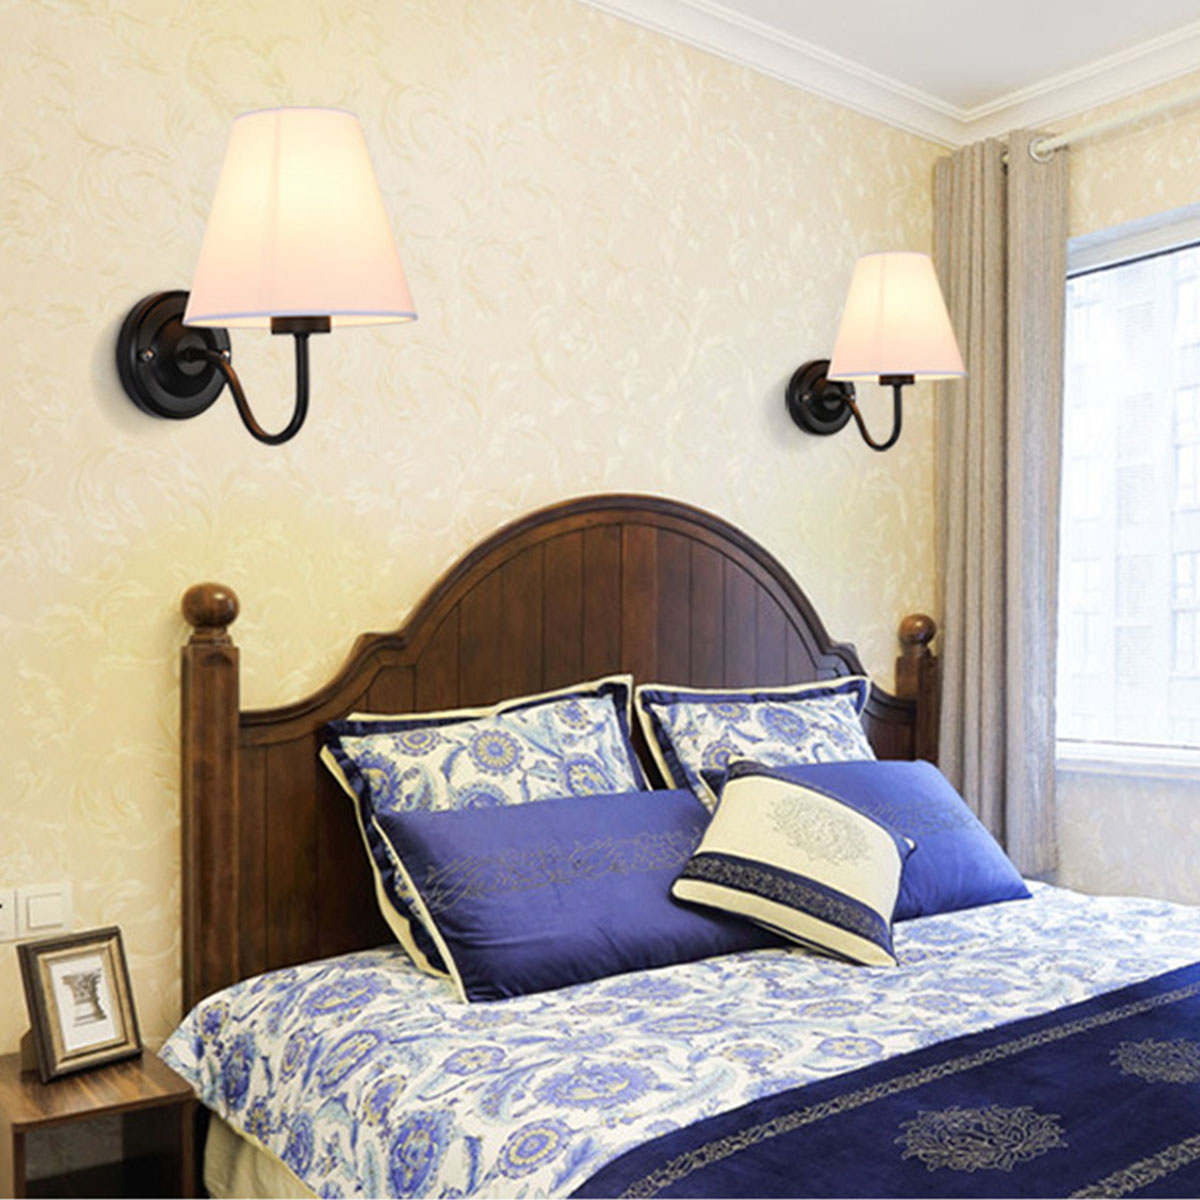 Vintage-Wall-Light-American-Style-Bedroom-Wrought-Iron-Retro-Bedside-Lamp-with-Power-Switch-Cord-Wit-1809575-4